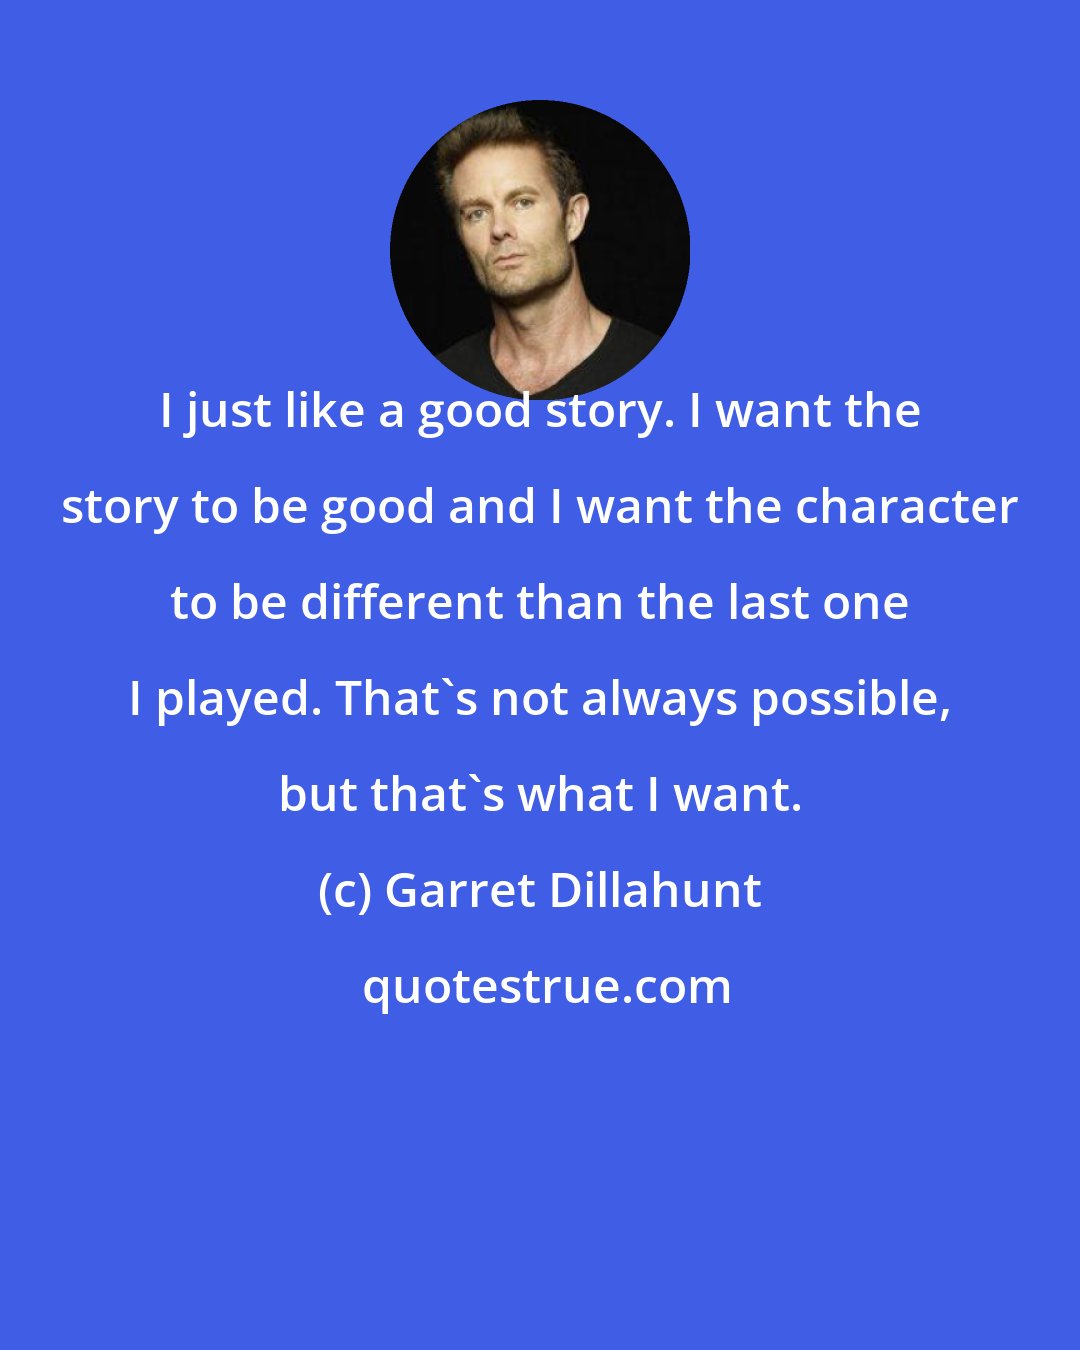 Garret Dillahunt: I just like a good story. I want the story to be good and I want the character to be different than the last one I played. That's not always possible, but that's what I want.